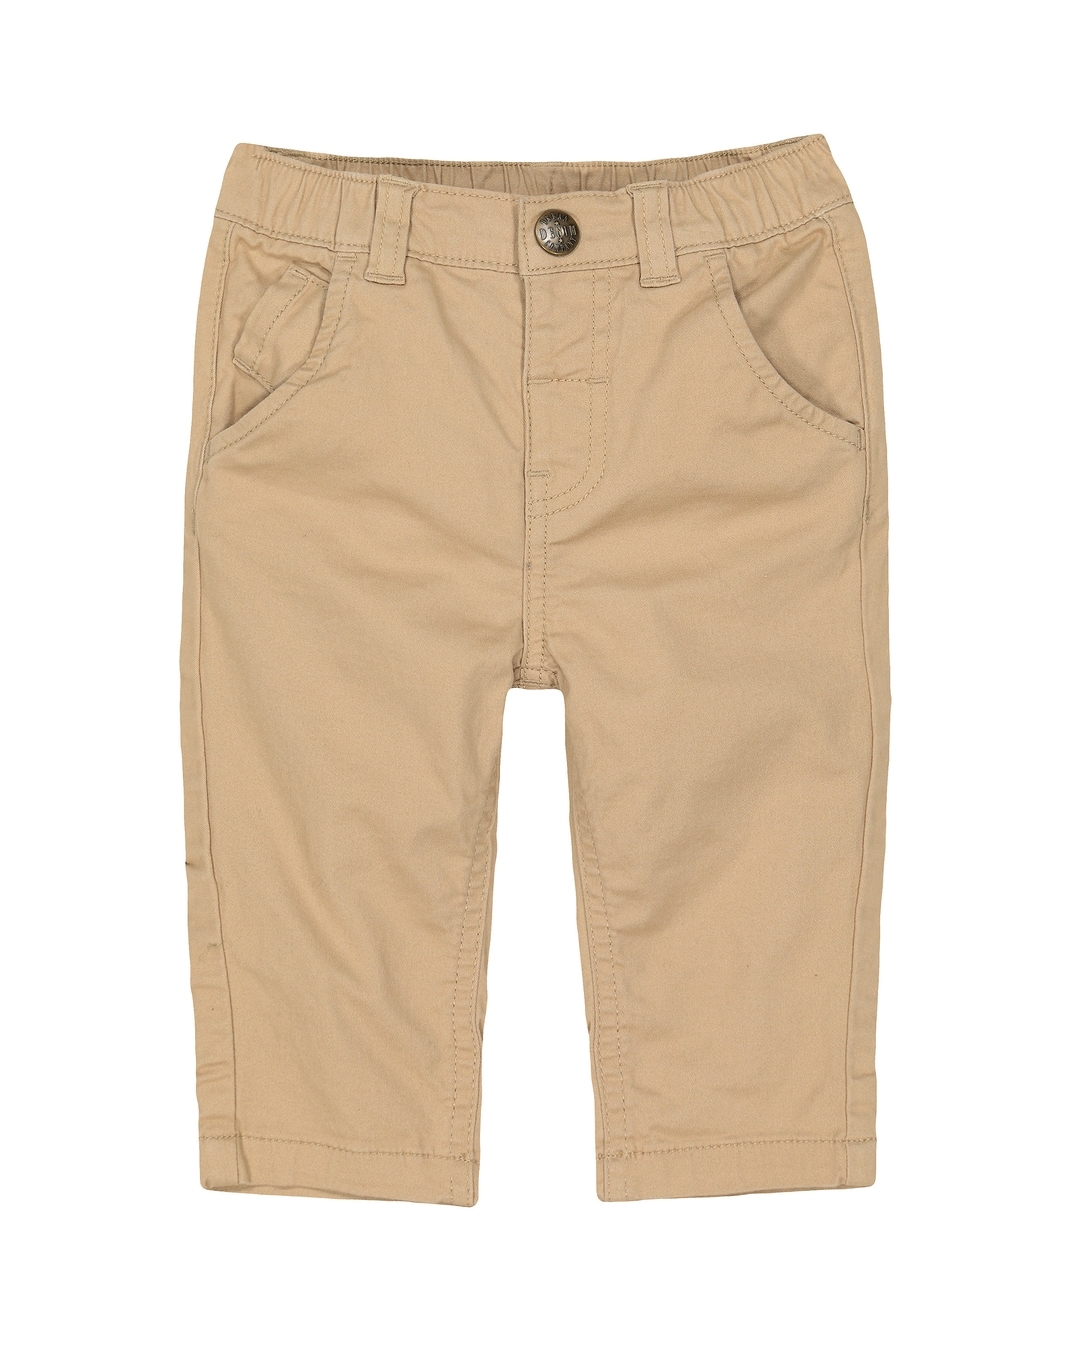 Buy LIFE Blue Solid Cotton Regular Fit Boys Trousers | Shoppers Stop-anthinhphatland.vn